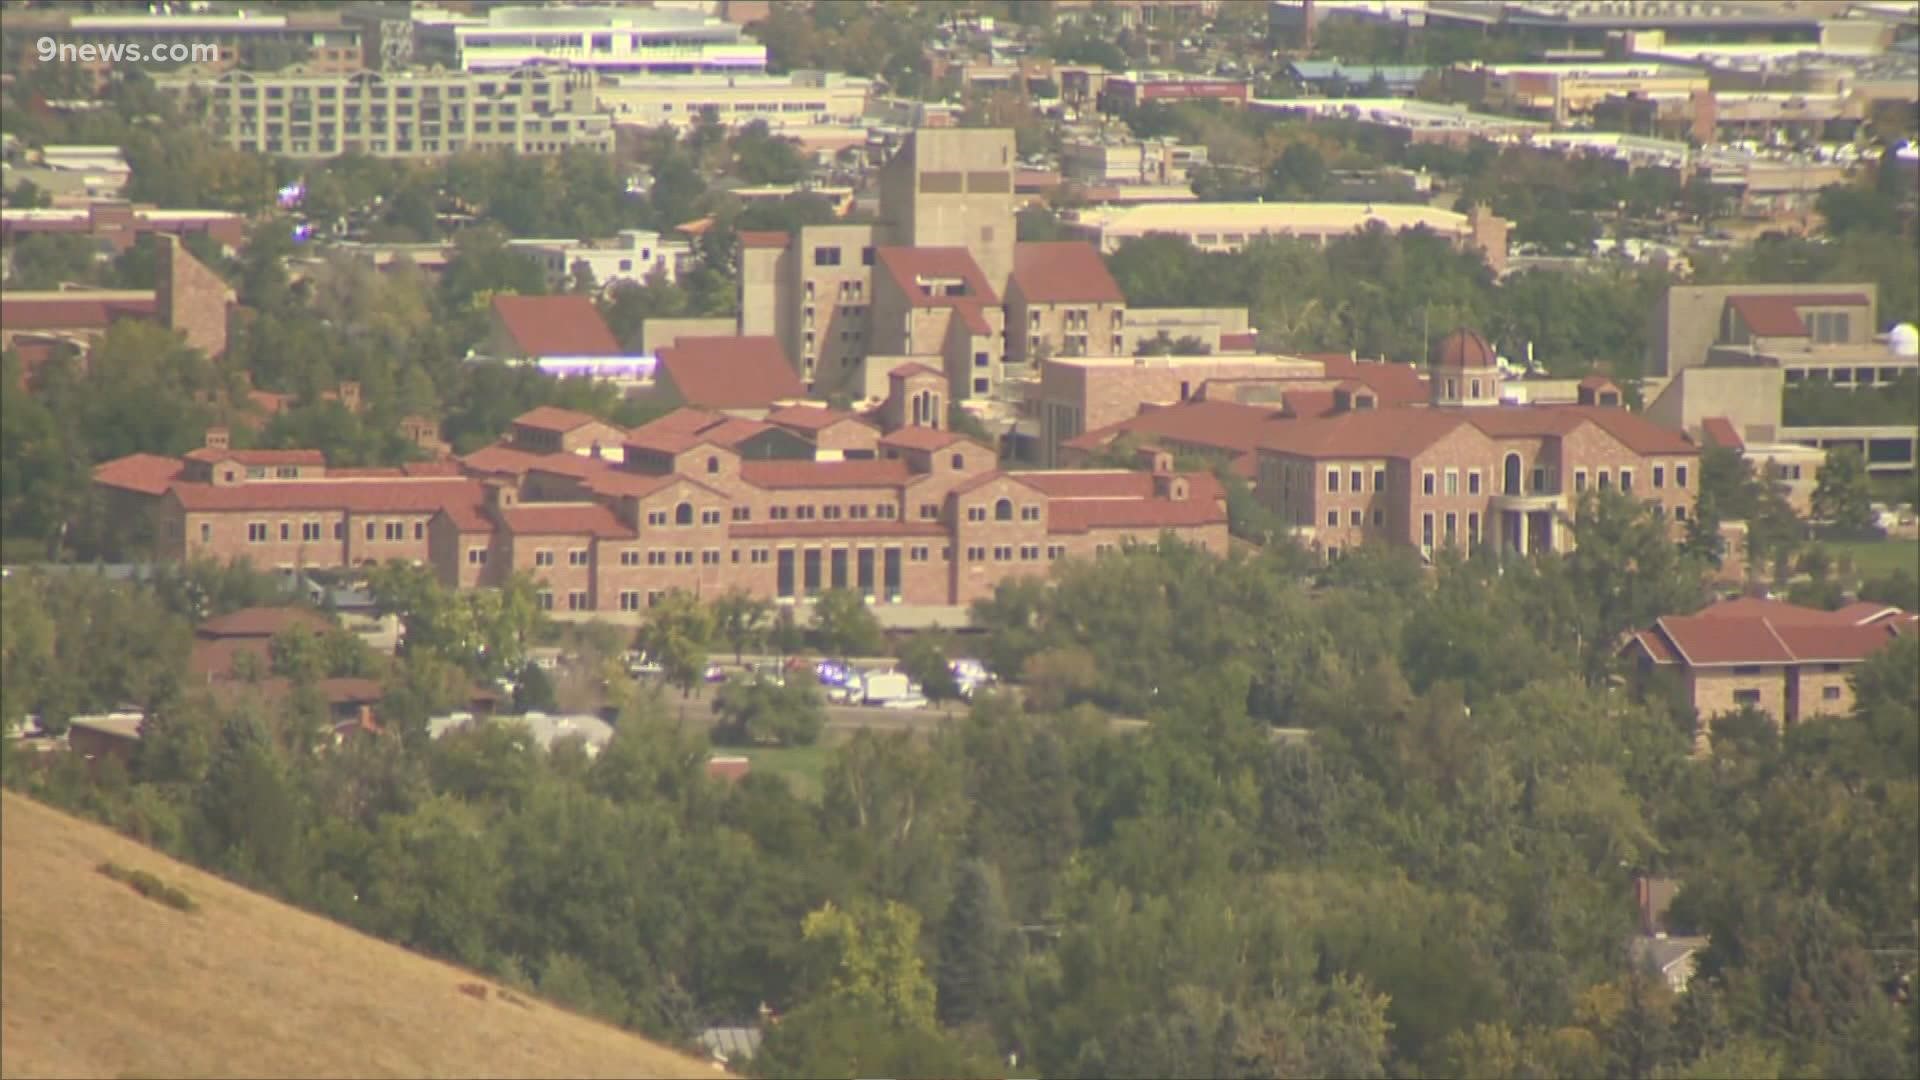 A spokesman for CU said the Board of Regents has not yet selected any finalists.